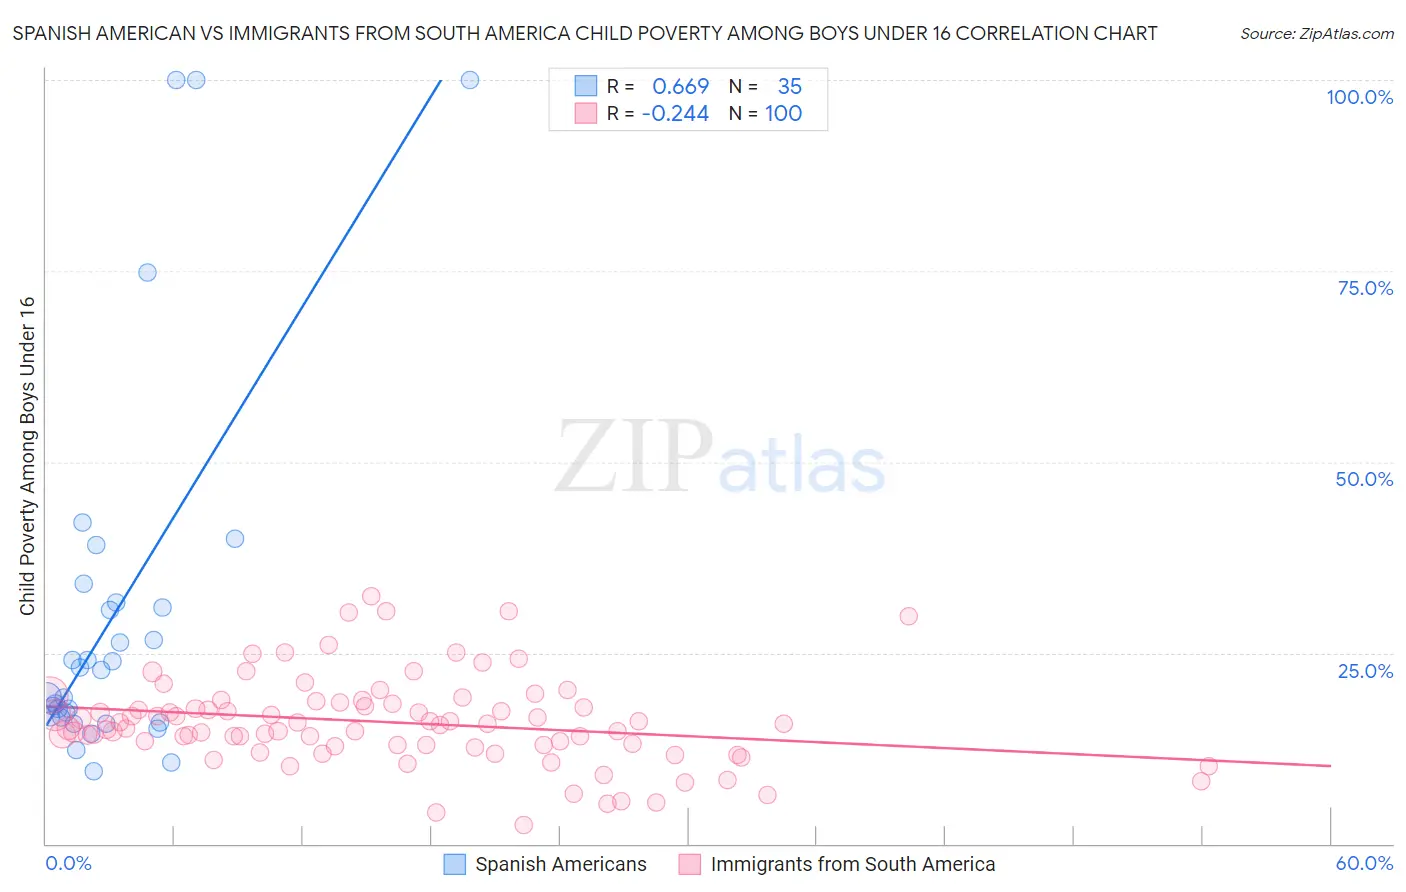 Spanish American vs Immigrants from South America Child Poverty Among Boys Under 16